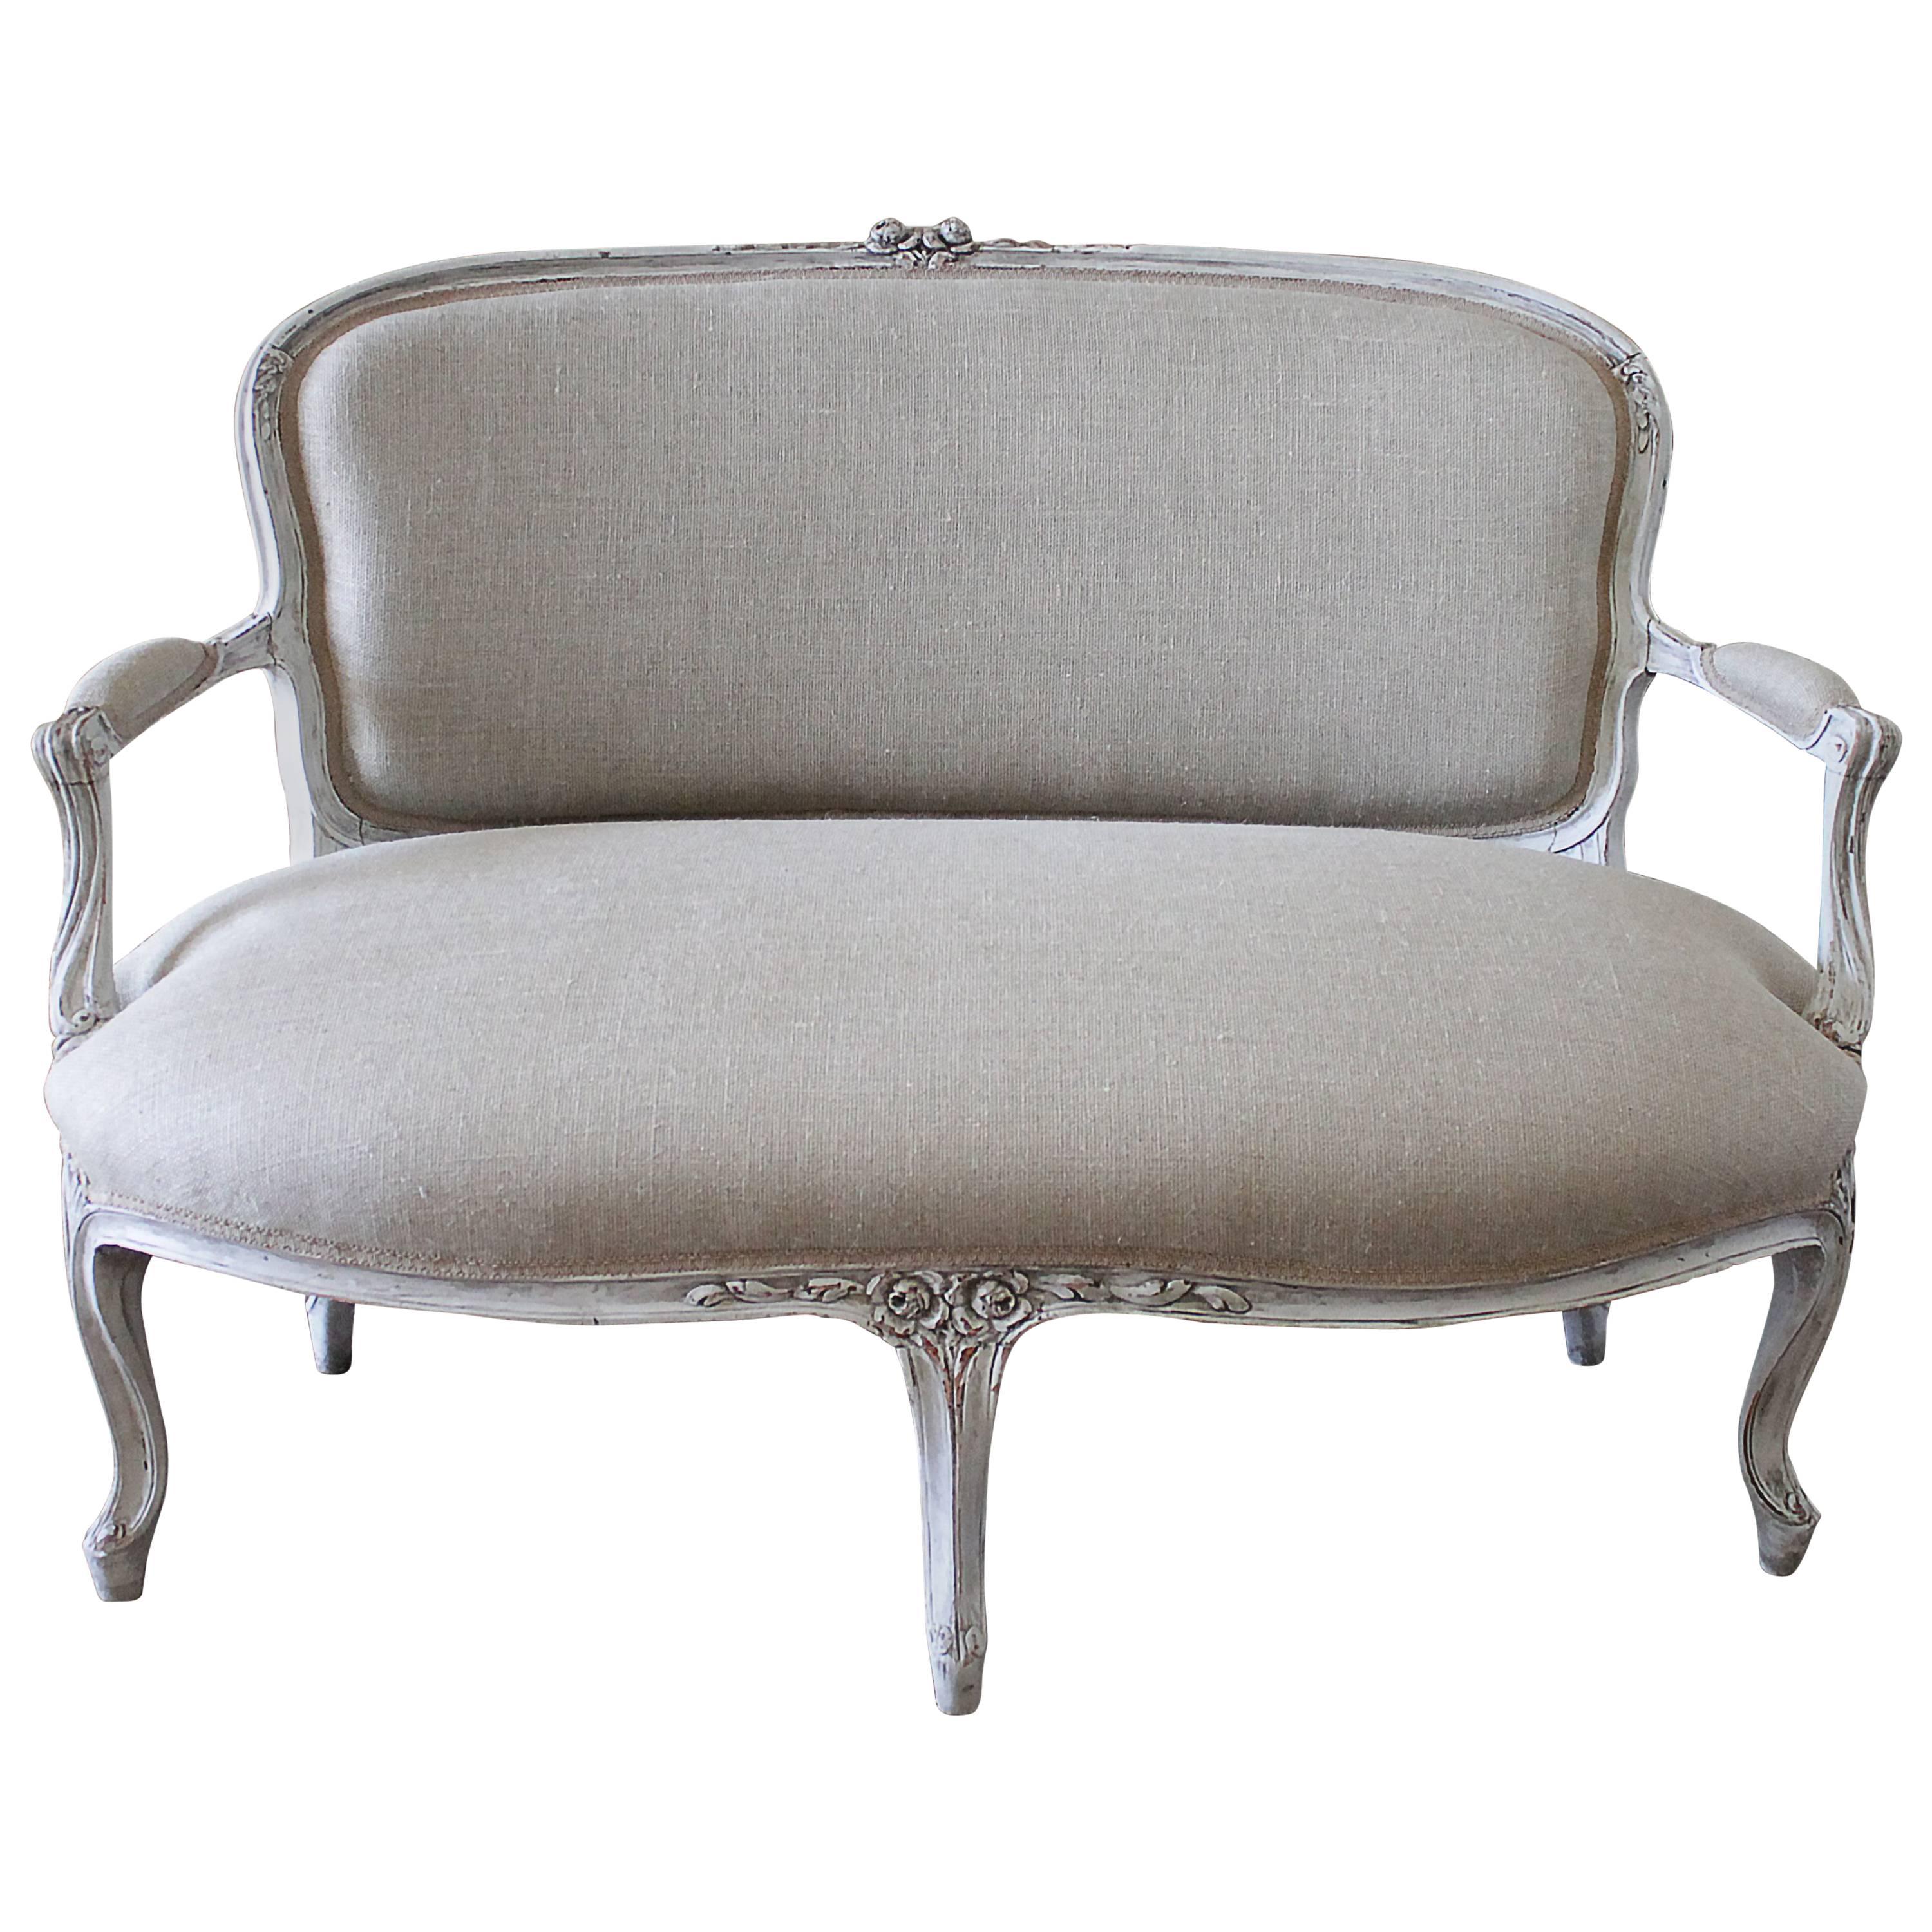 19th Century French Country Hand-Carved Settee in Linen